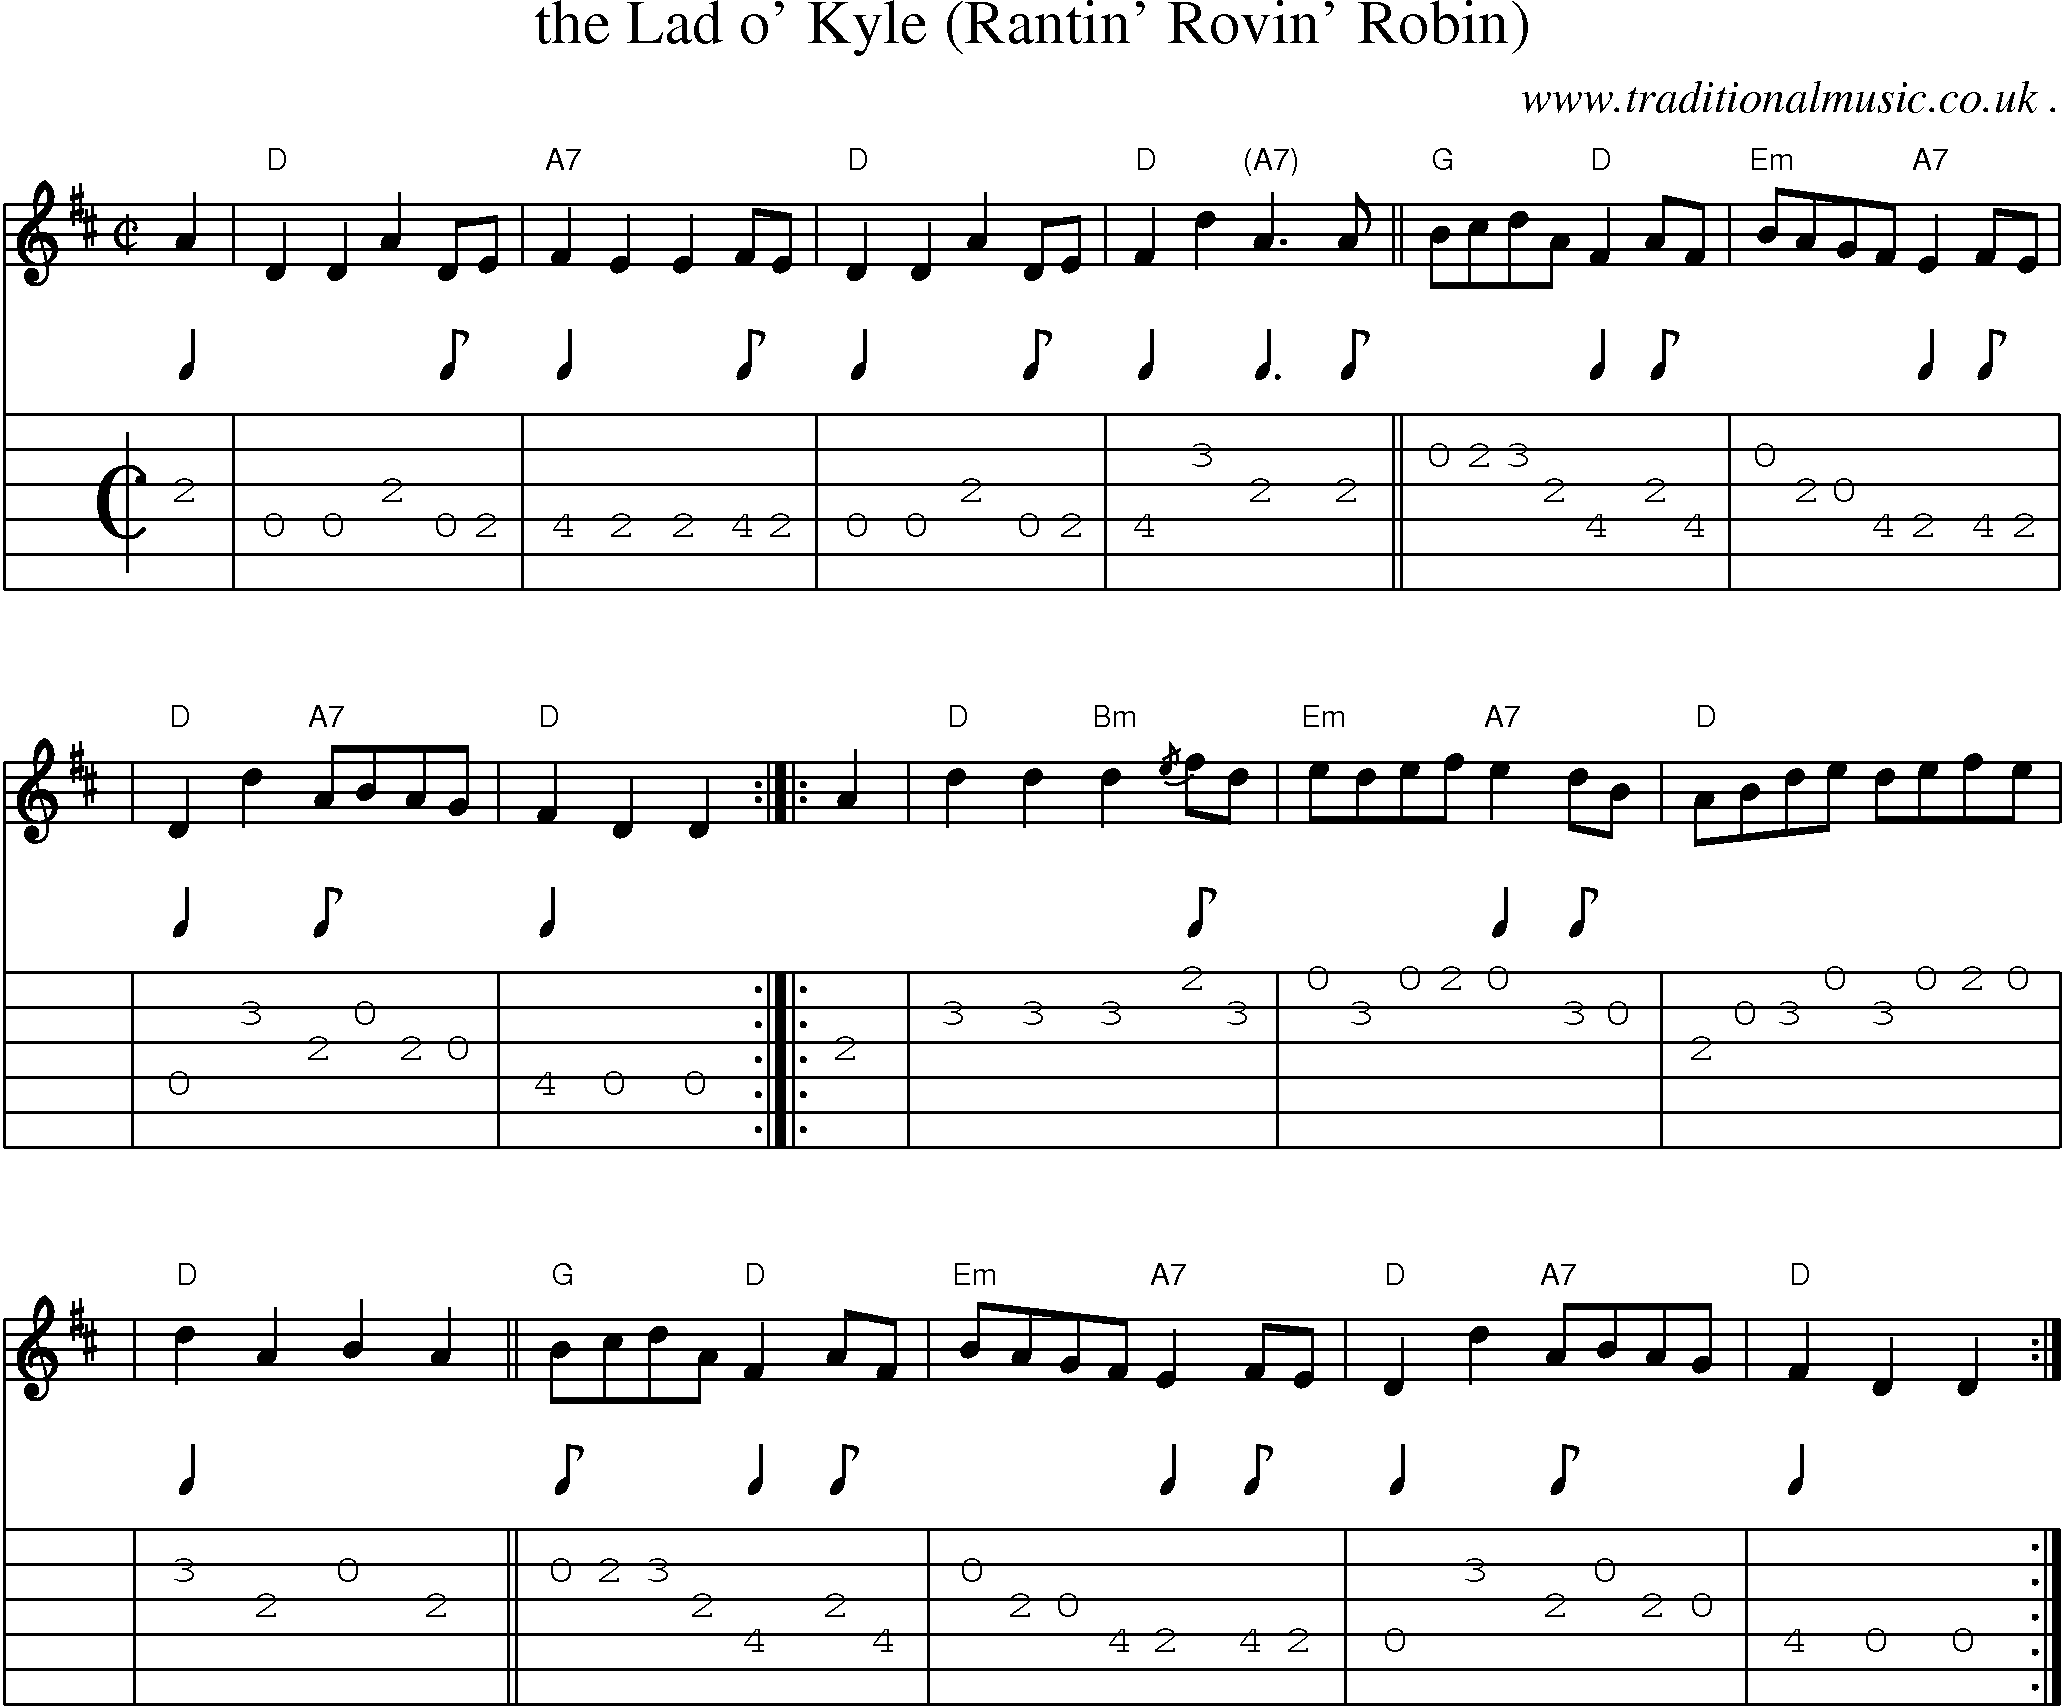 Sheet-music  score, Chords and Guitar Tabs for The Lad O Kyle Rantin Rovin Robin